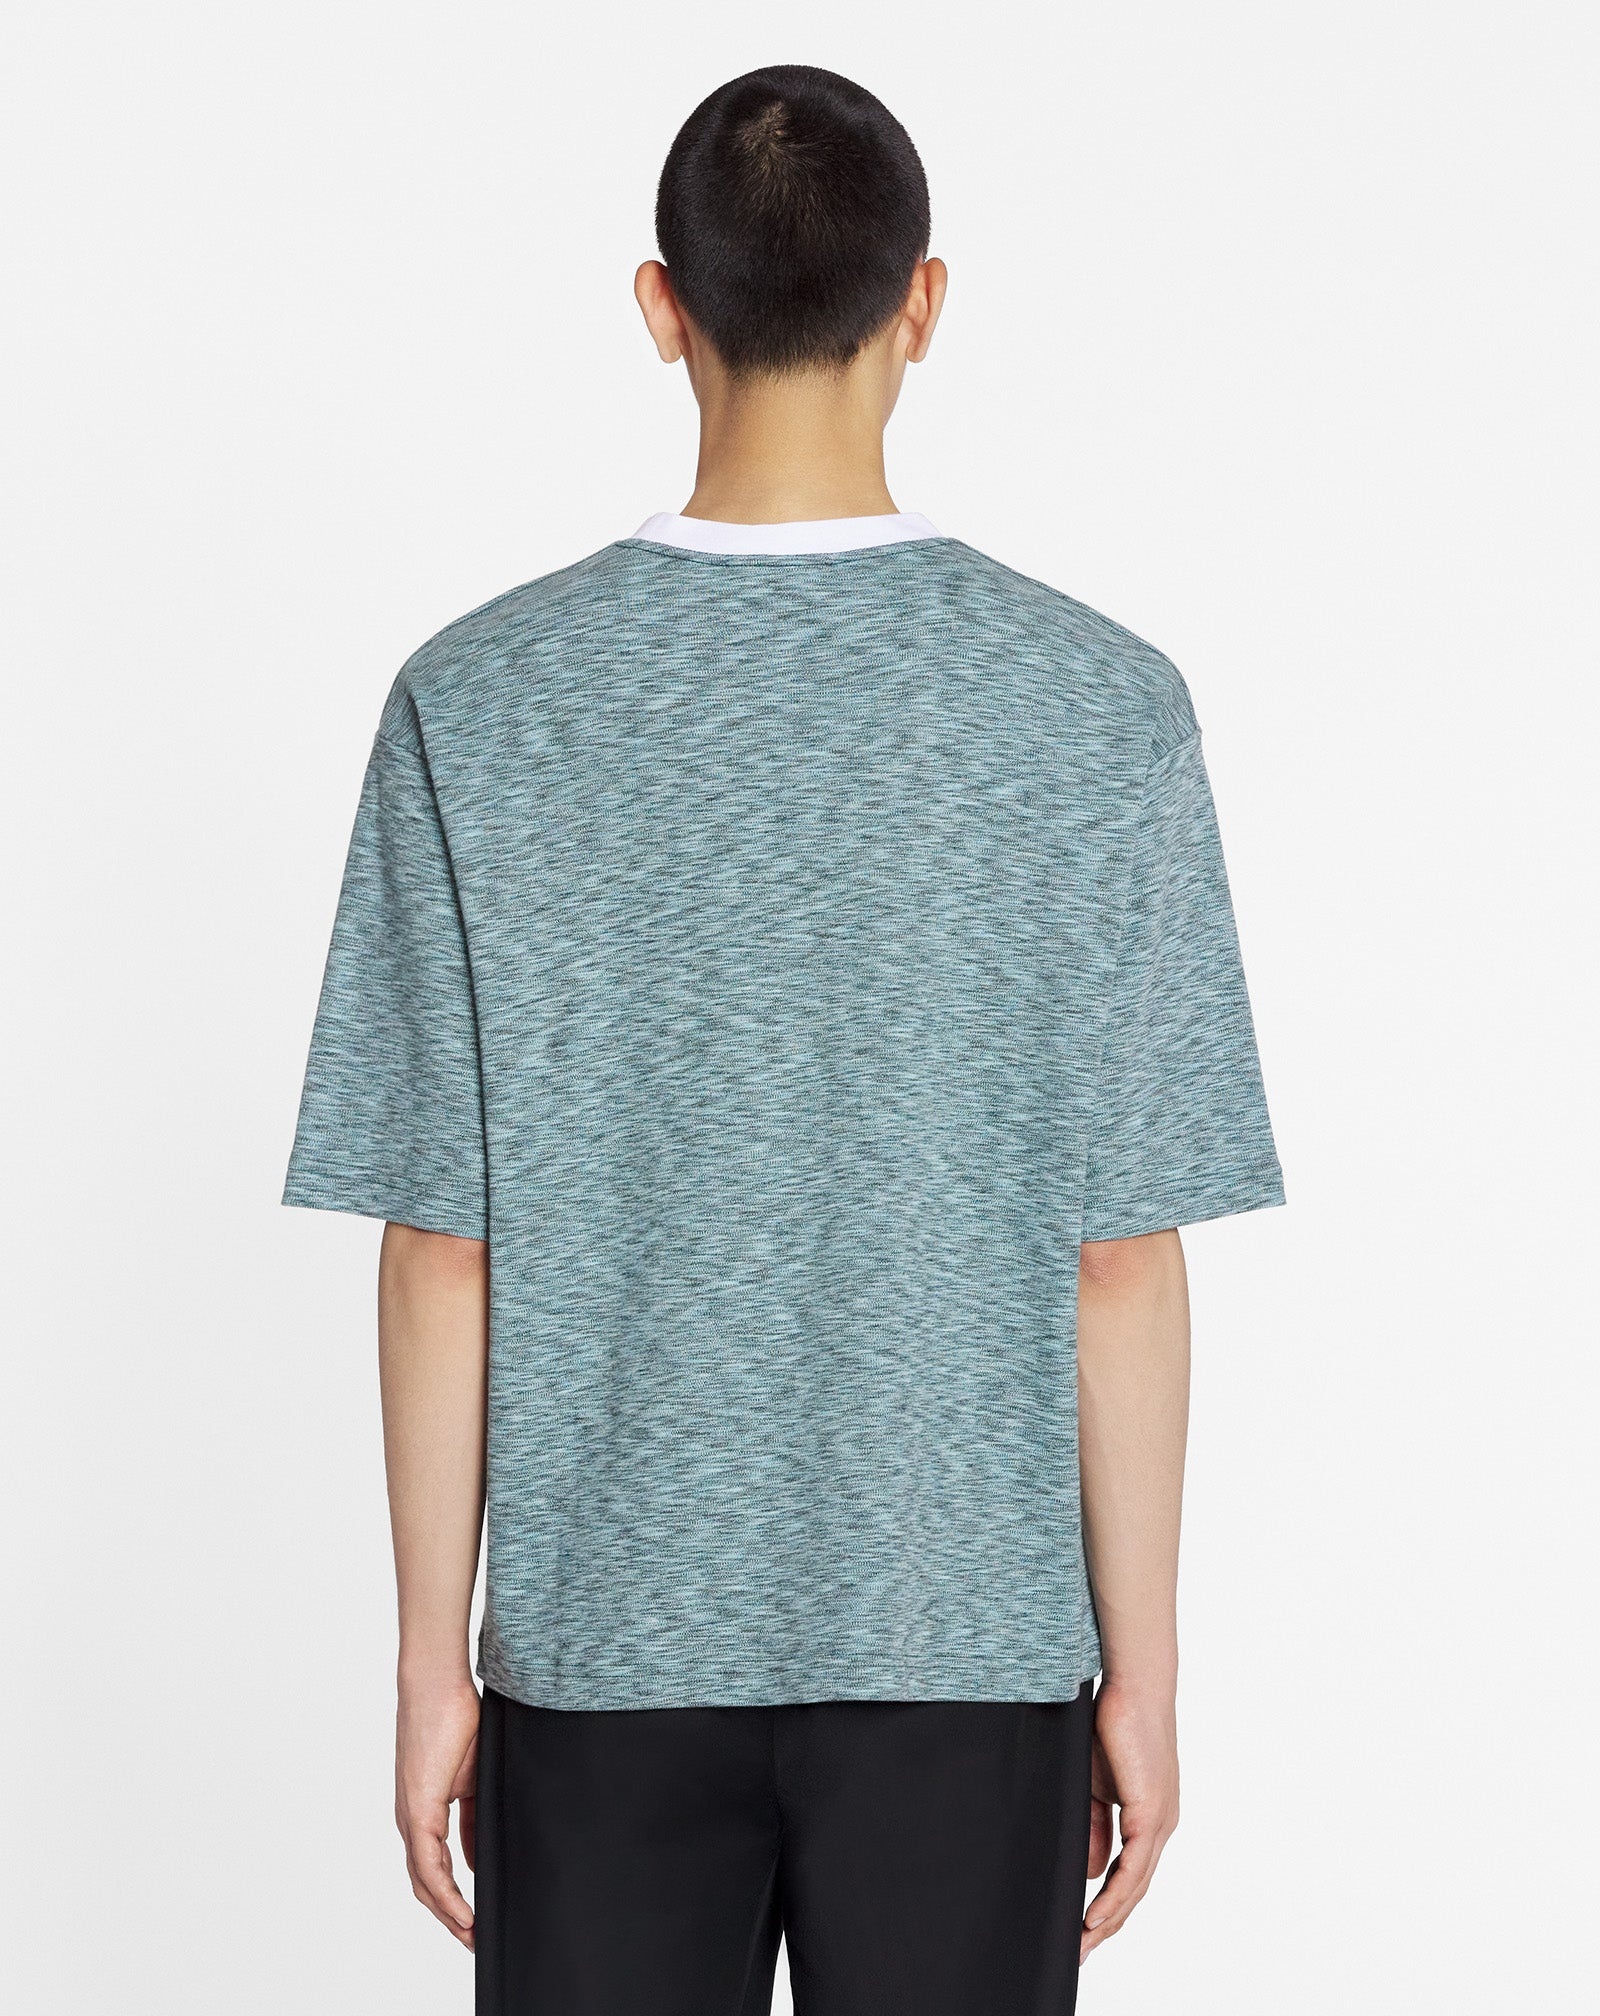 HEATHERED-EFFECT LOOSE-FITTING T-SHIRT - 4